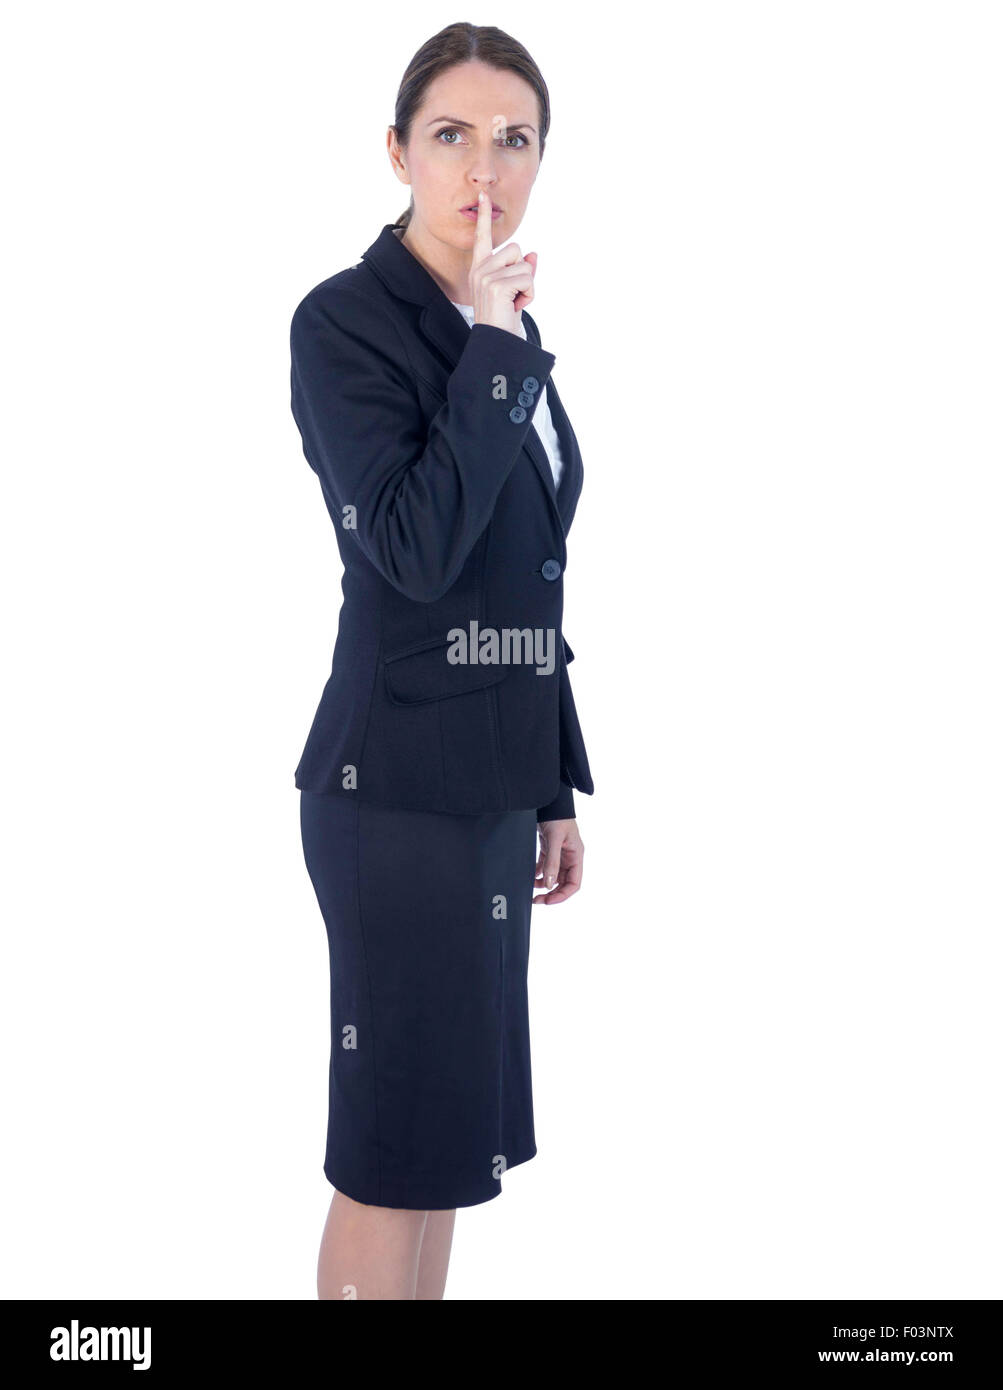 Pretty businesswoman asking for silence Stock Photo